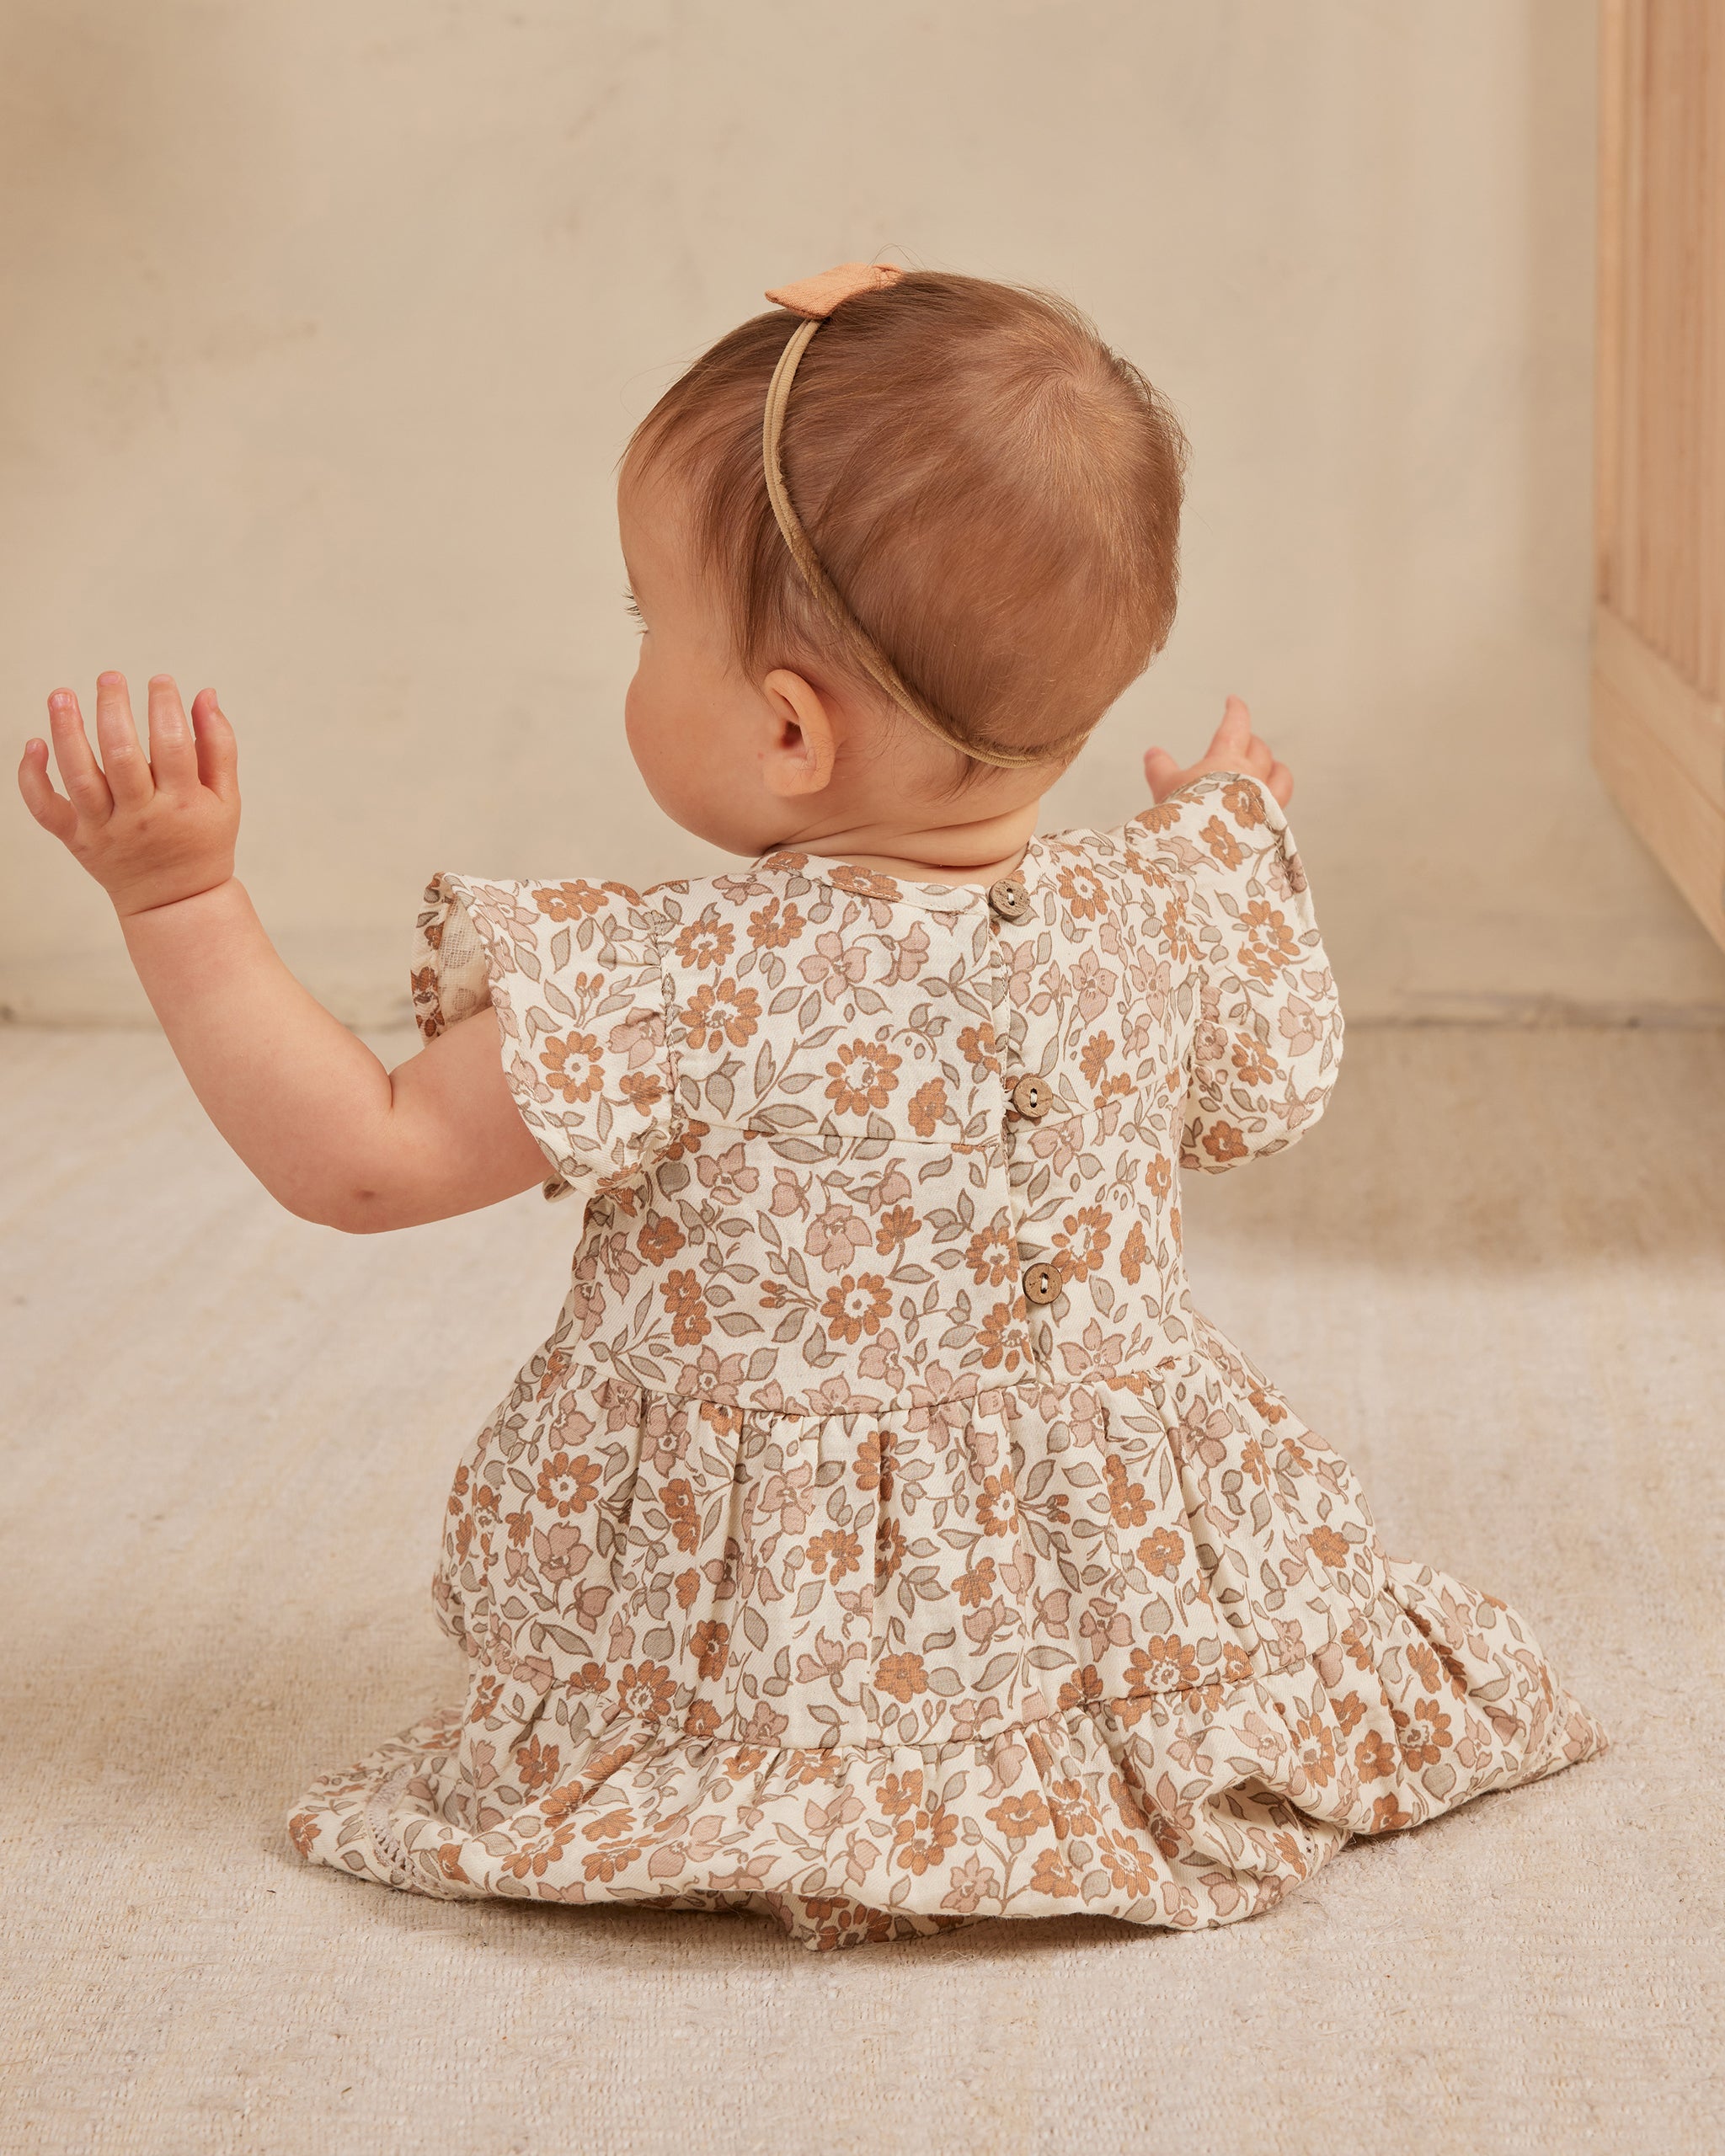 Lily Dress || Garden - Rylee + Cru | Kids Clothes | Trendy Baby Clothes | Modern Infant Outfits |